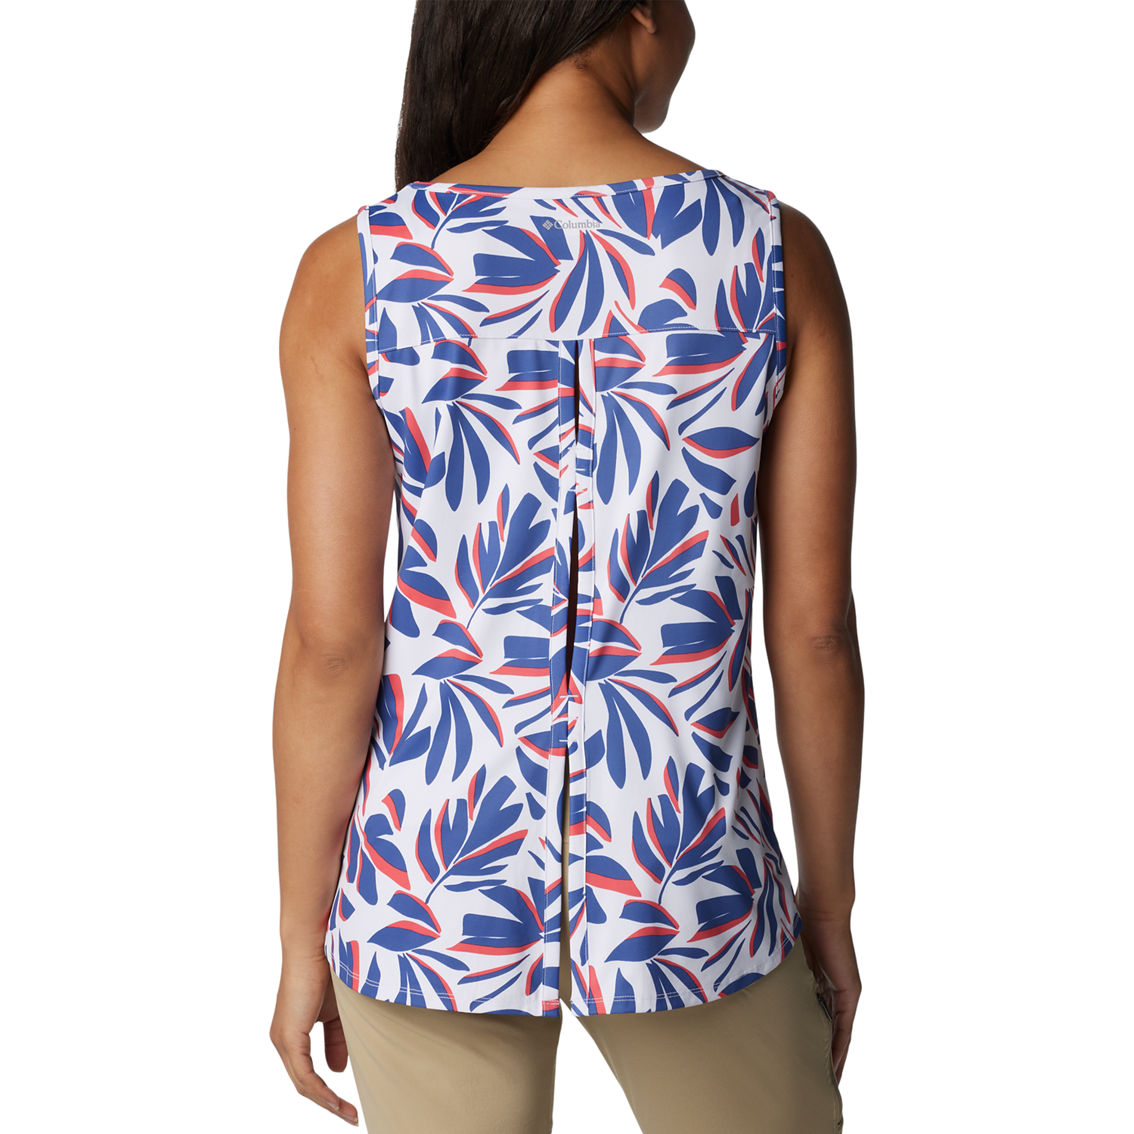 Columbia Chill River Tank Top - Image 2 of 4